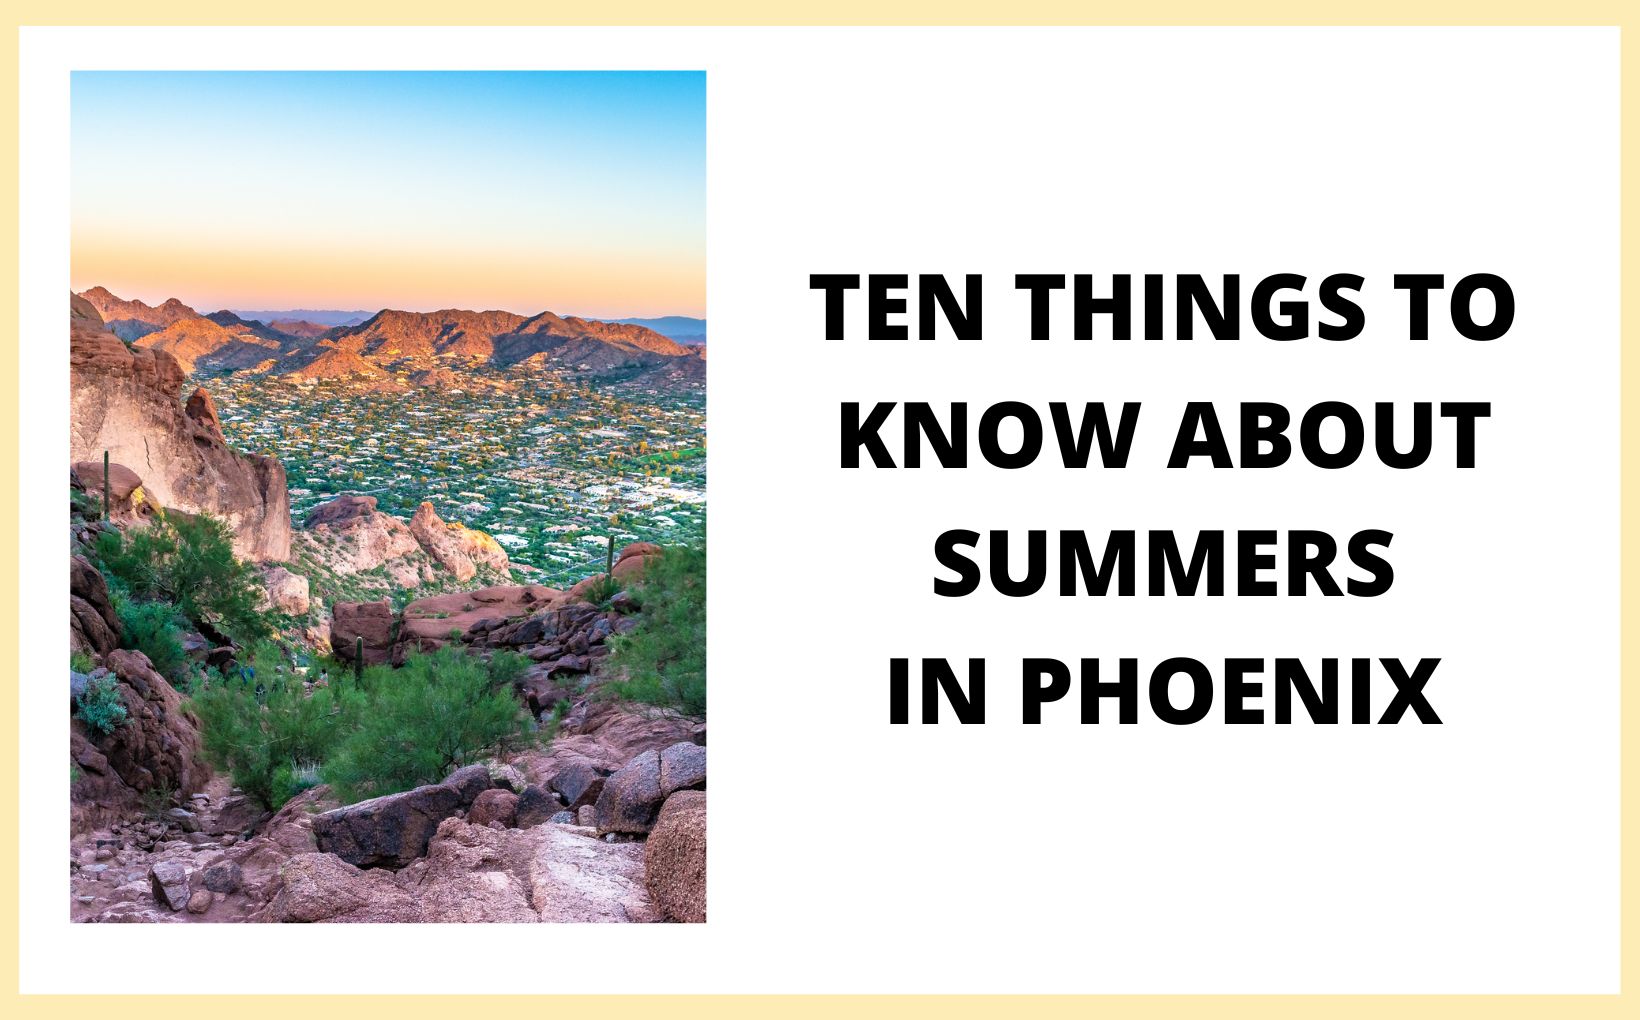 https://livinginphoenixaz.com/wp-content/uploads/2022/08/Ten-things-to-know-about-summer-in-Phoenix-Arizona-feature-image.jpg